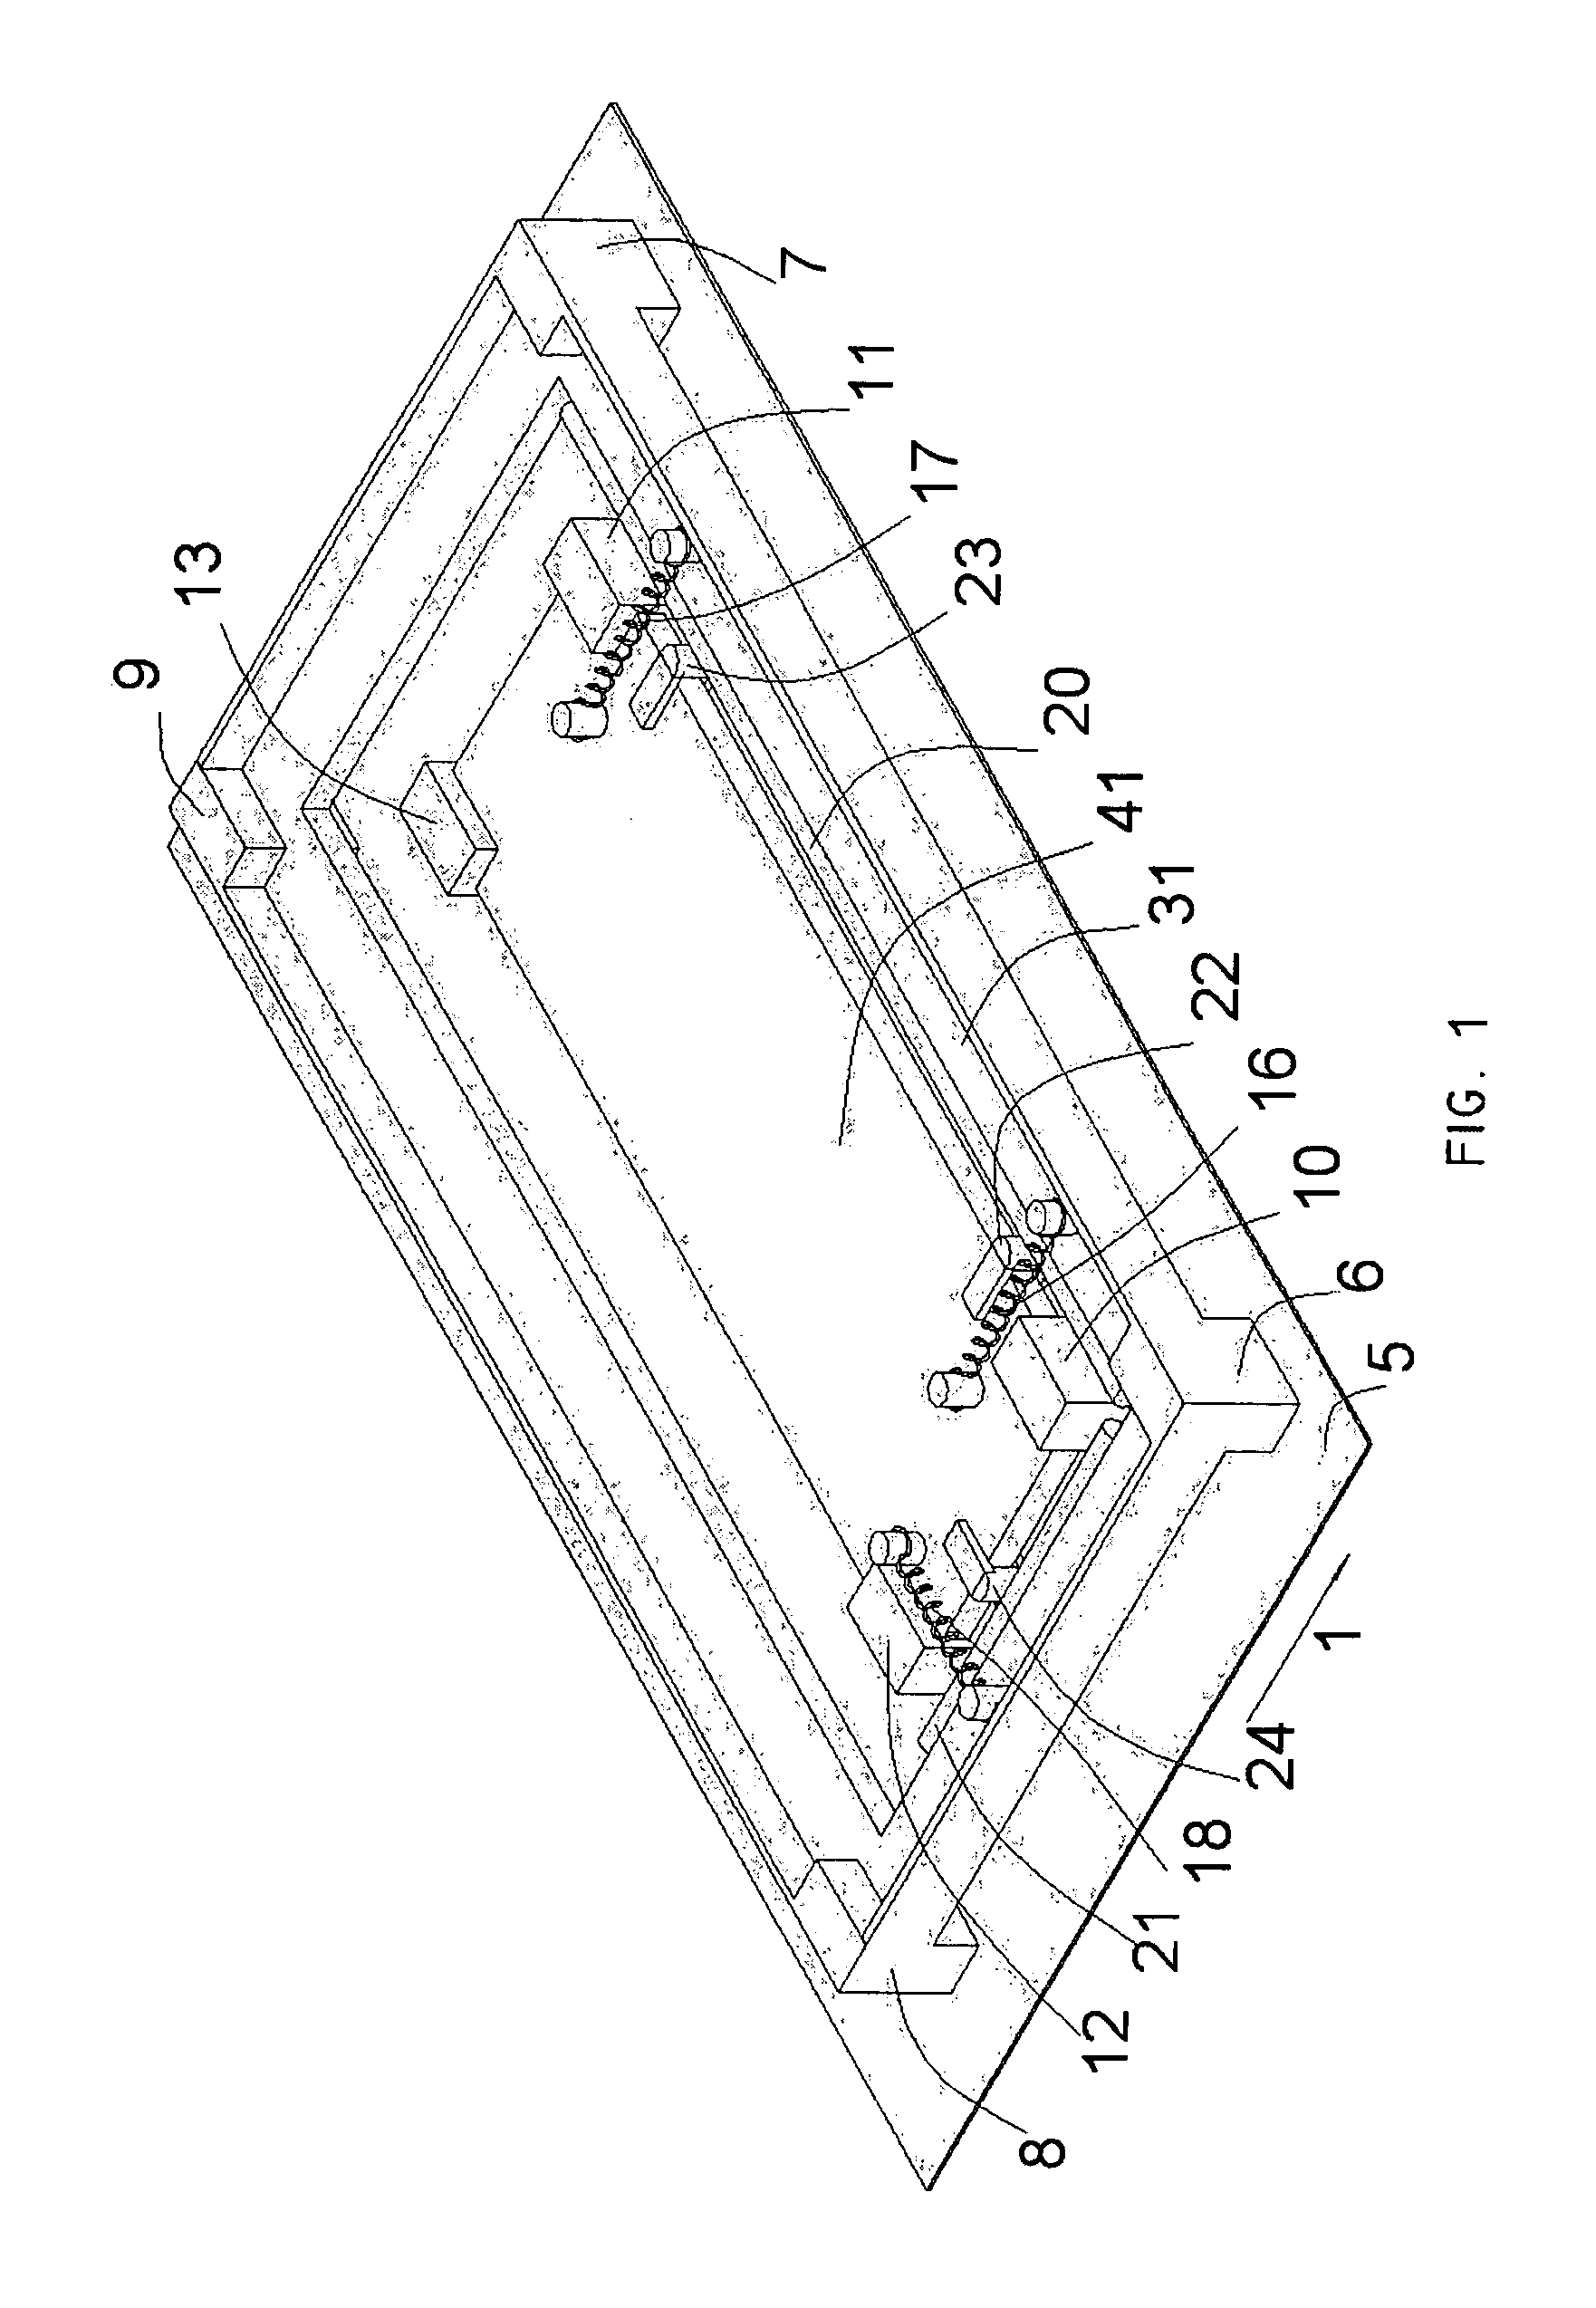 Image forming device and method using intermittent motion across a work surface